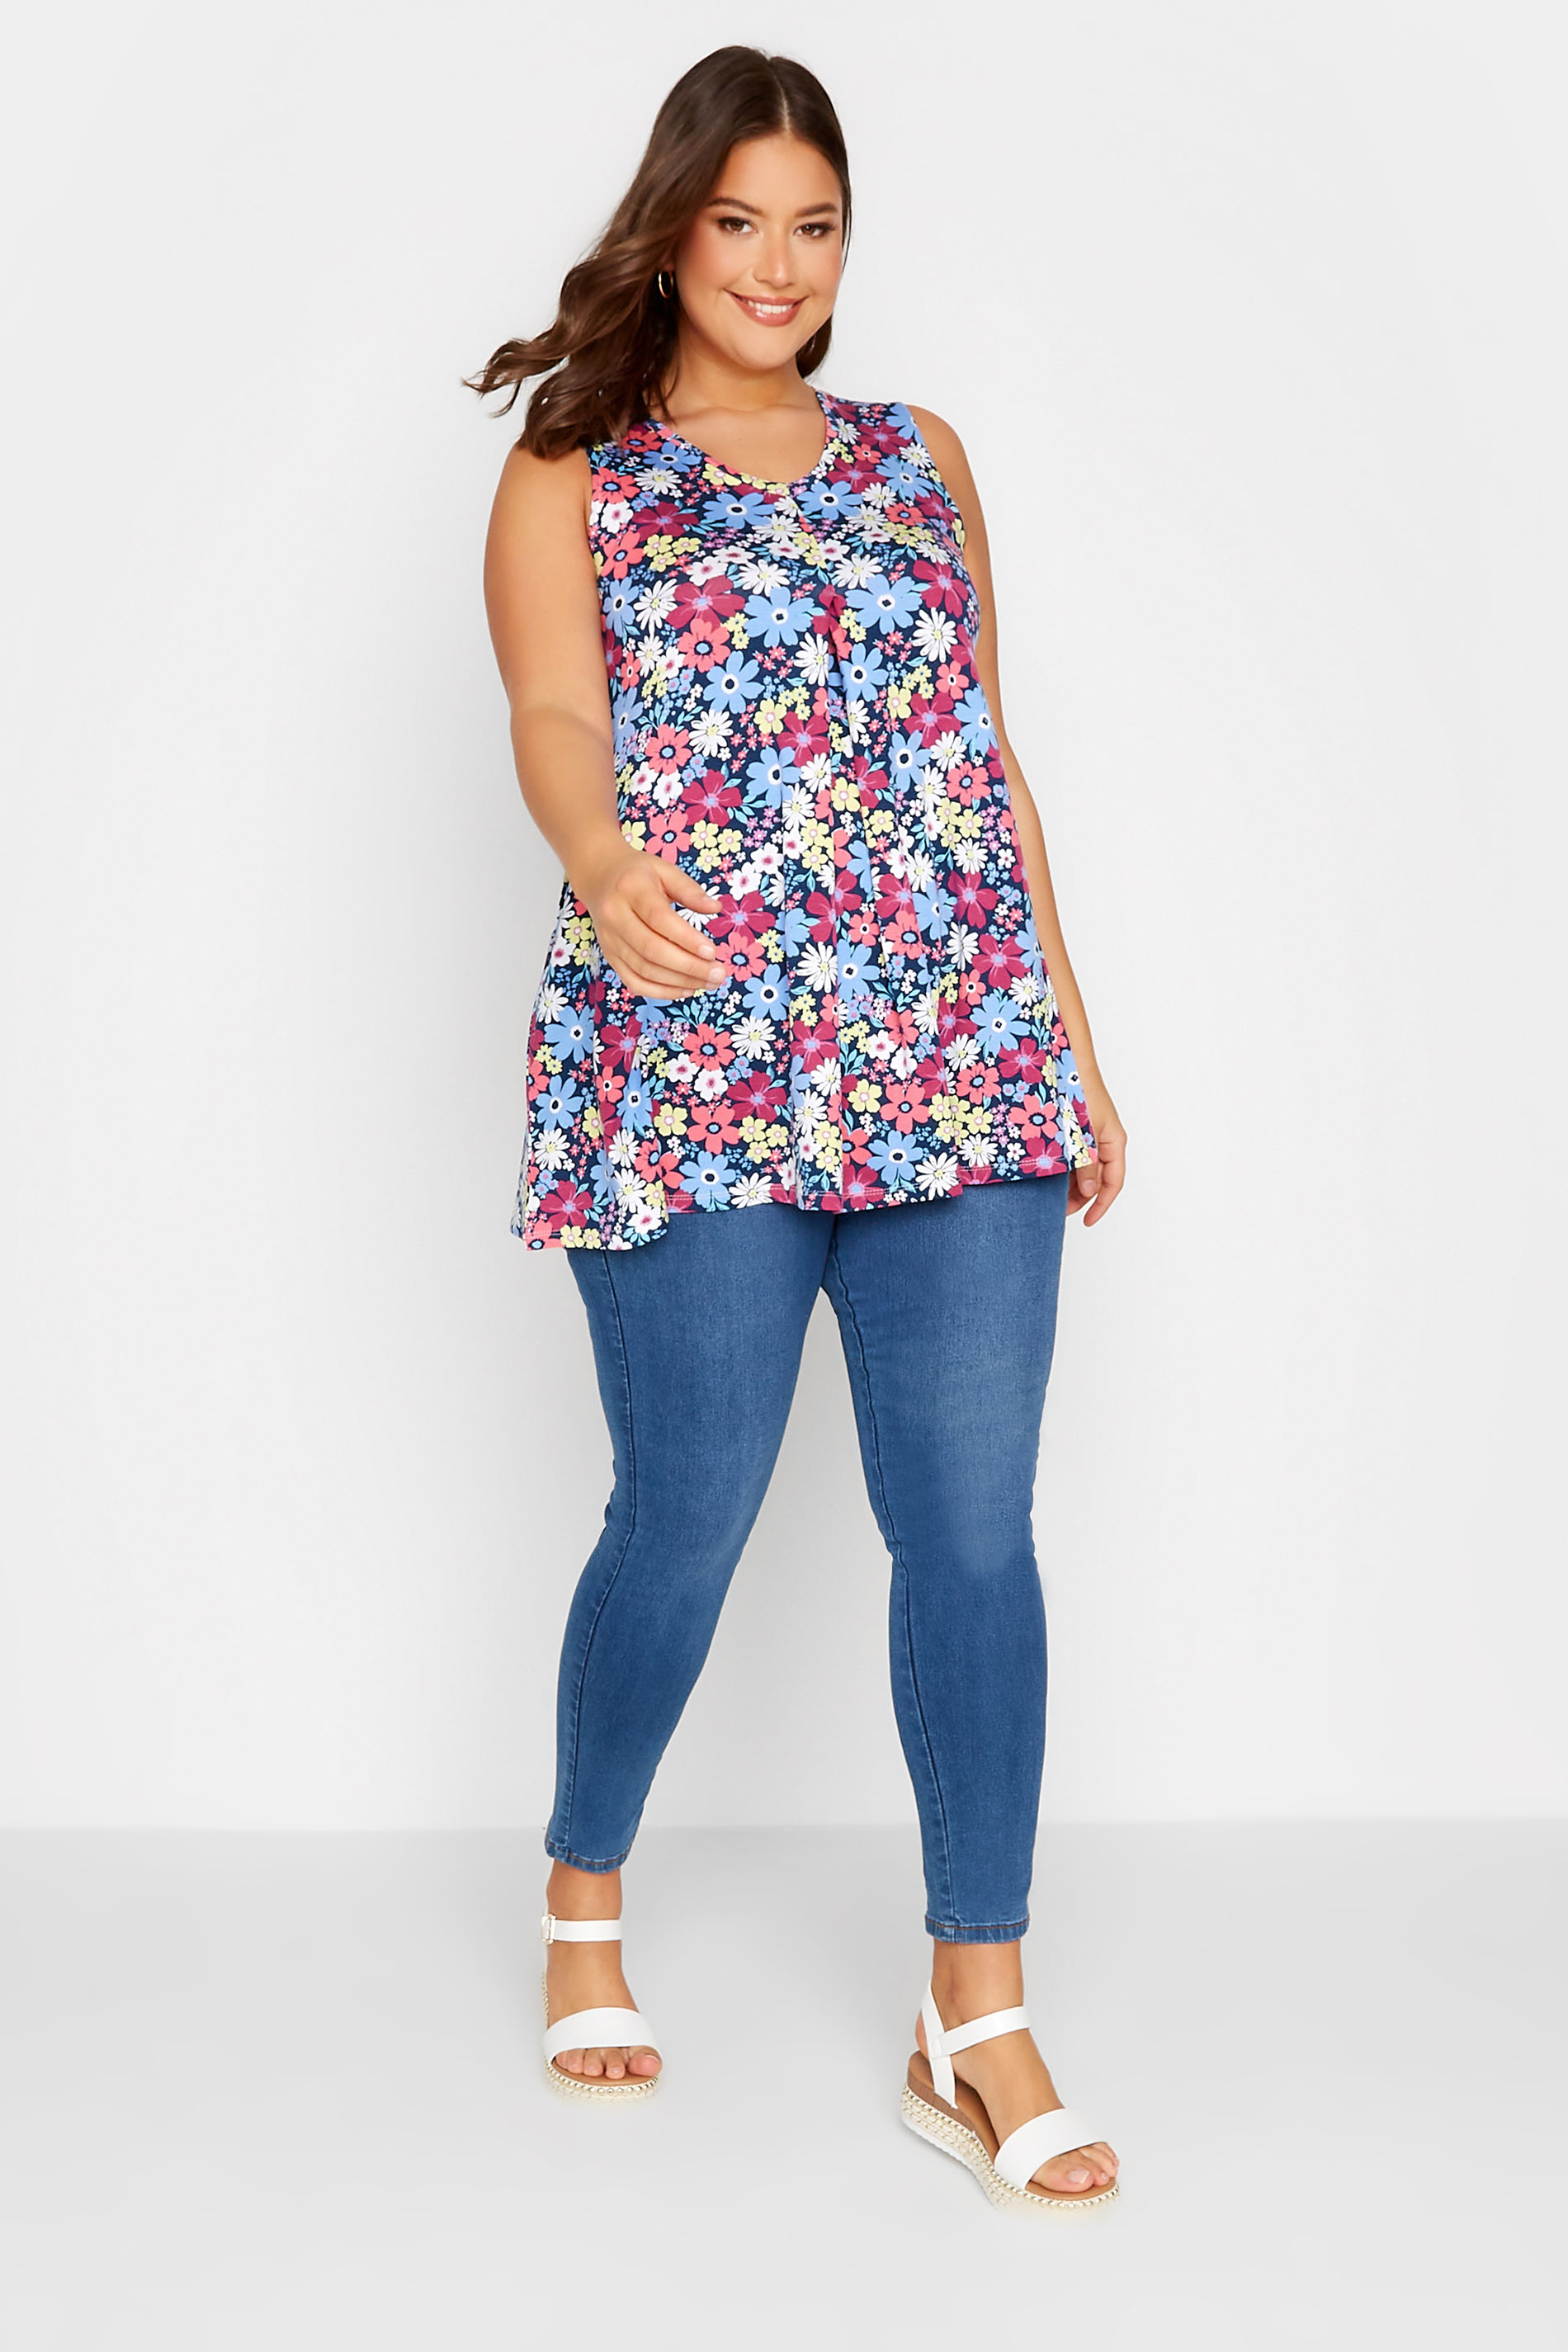 YOURS Plus Size Blue Floral Print Swing Vest Top | Yours Clothing  2